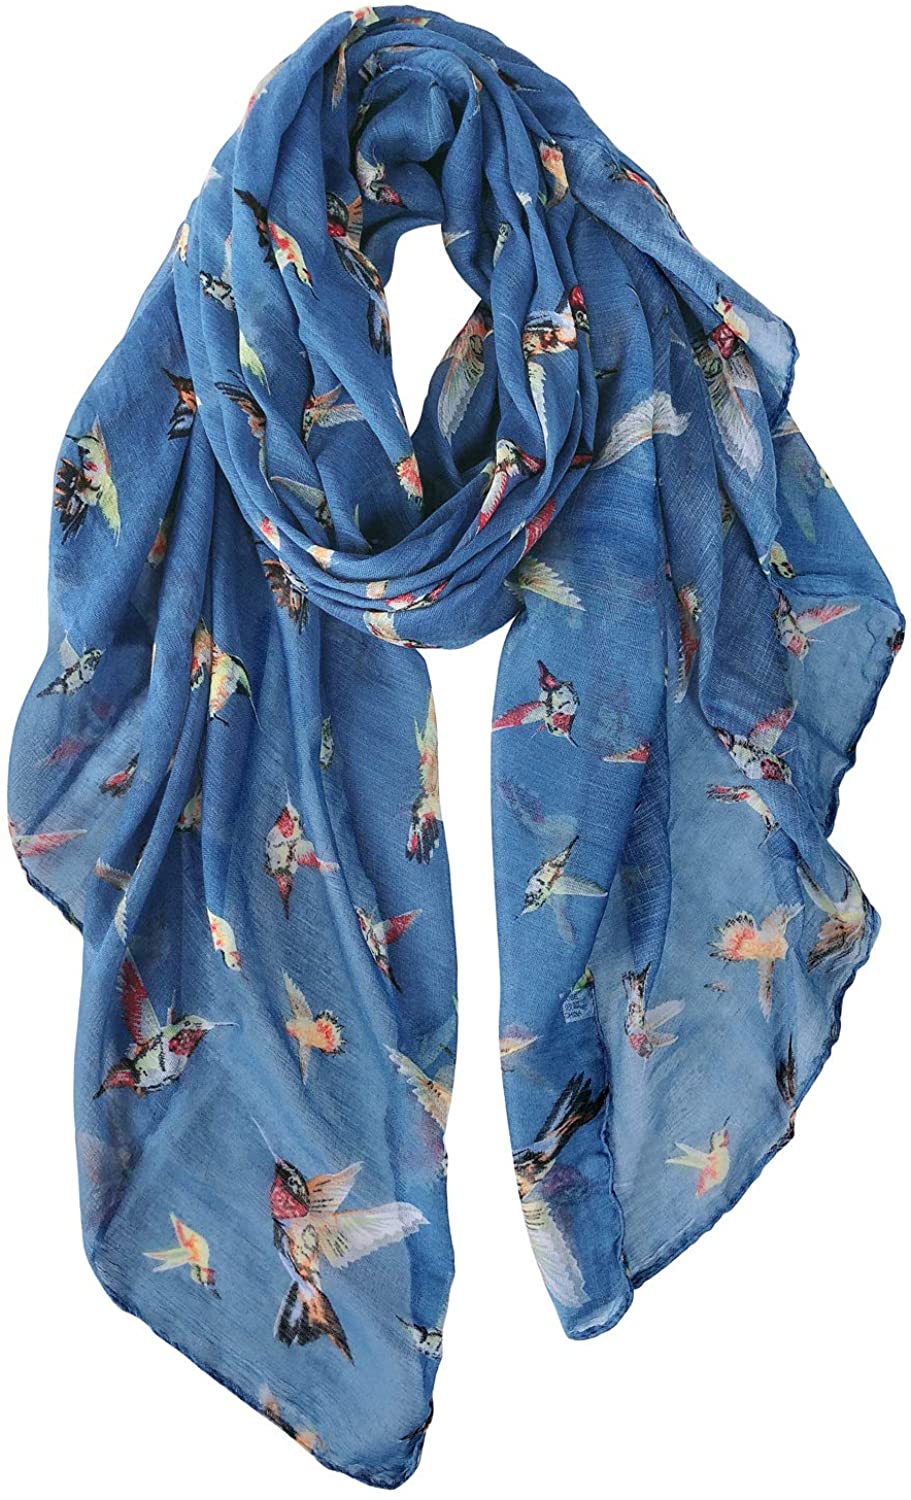 GERINLY Scarfs for Women Lightweight Floral Birds Print Cotton Scarves and  Wraps for Spring Shawl